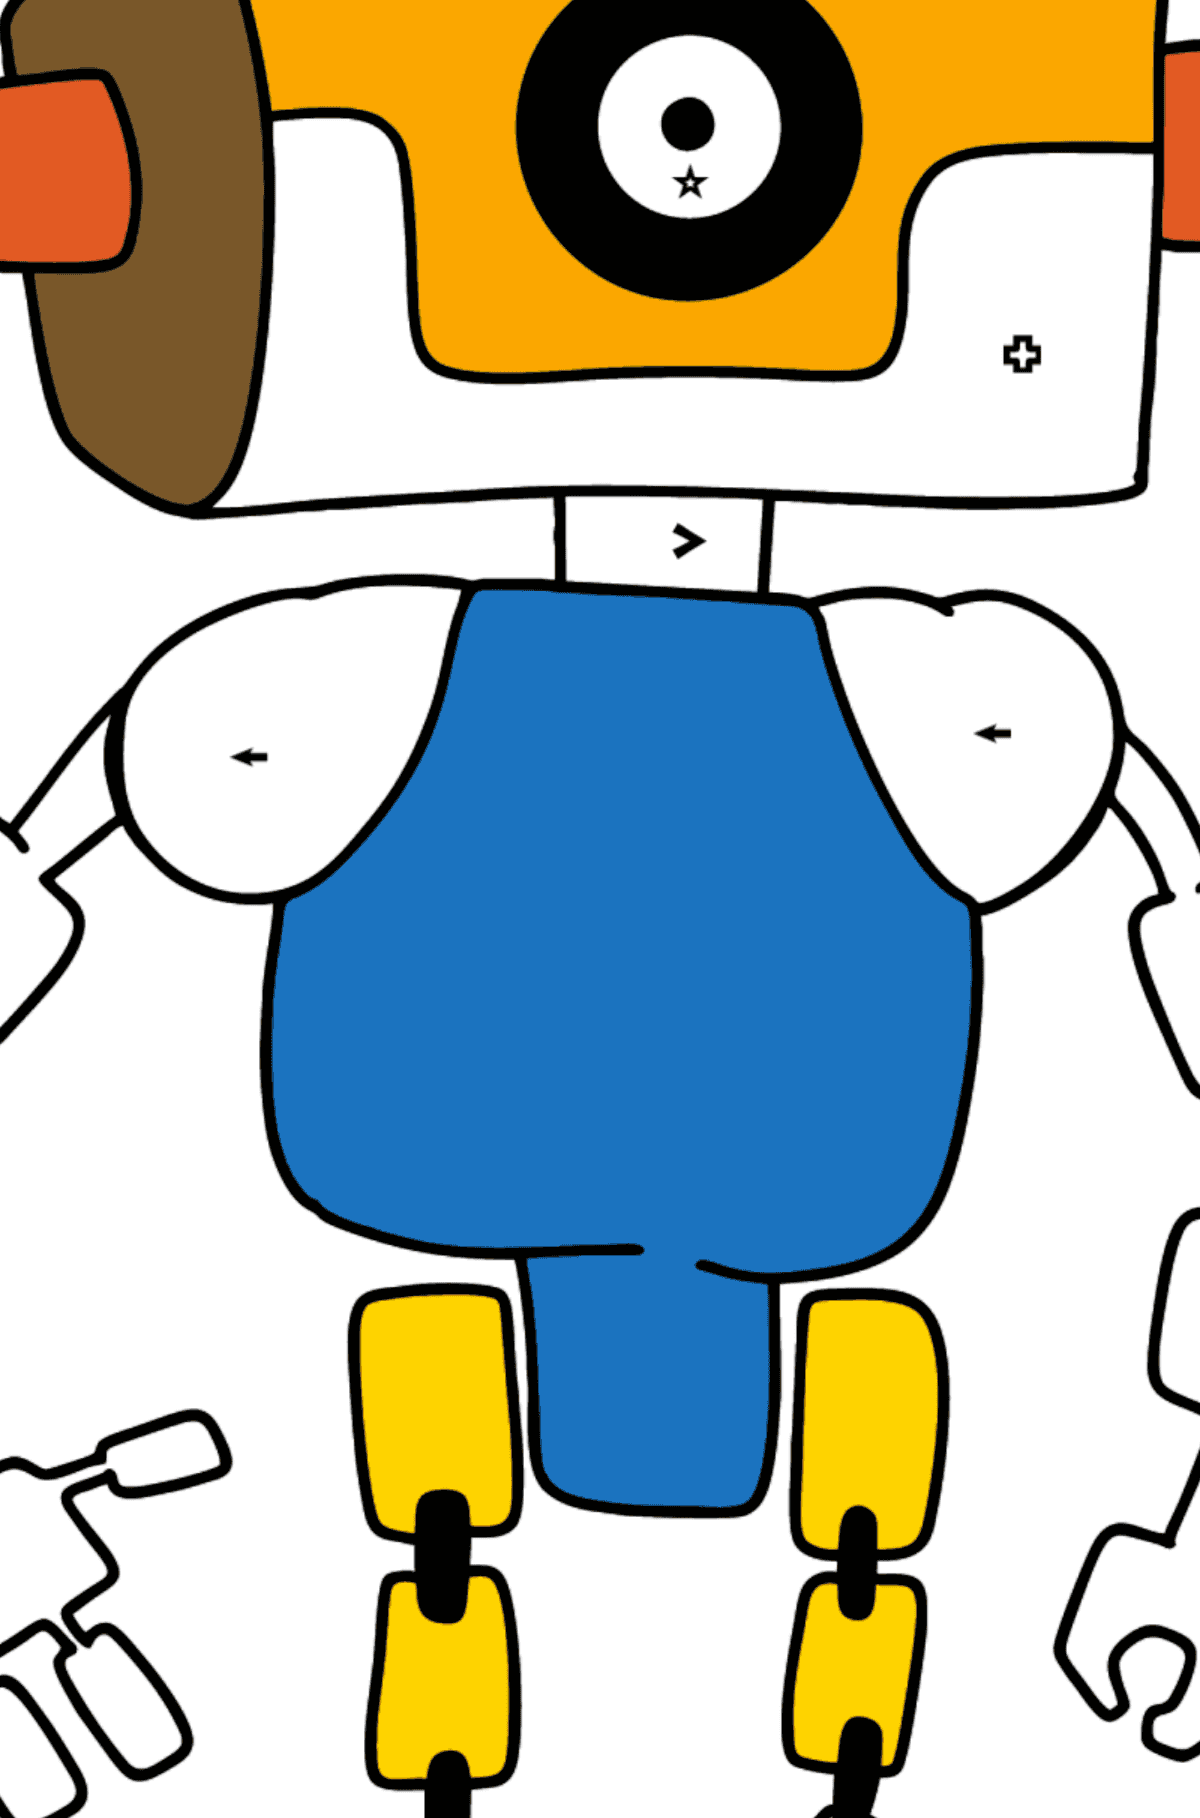 Adorable Robot coloring page - Coloring by Symbols and Geometric Shapes for Kids